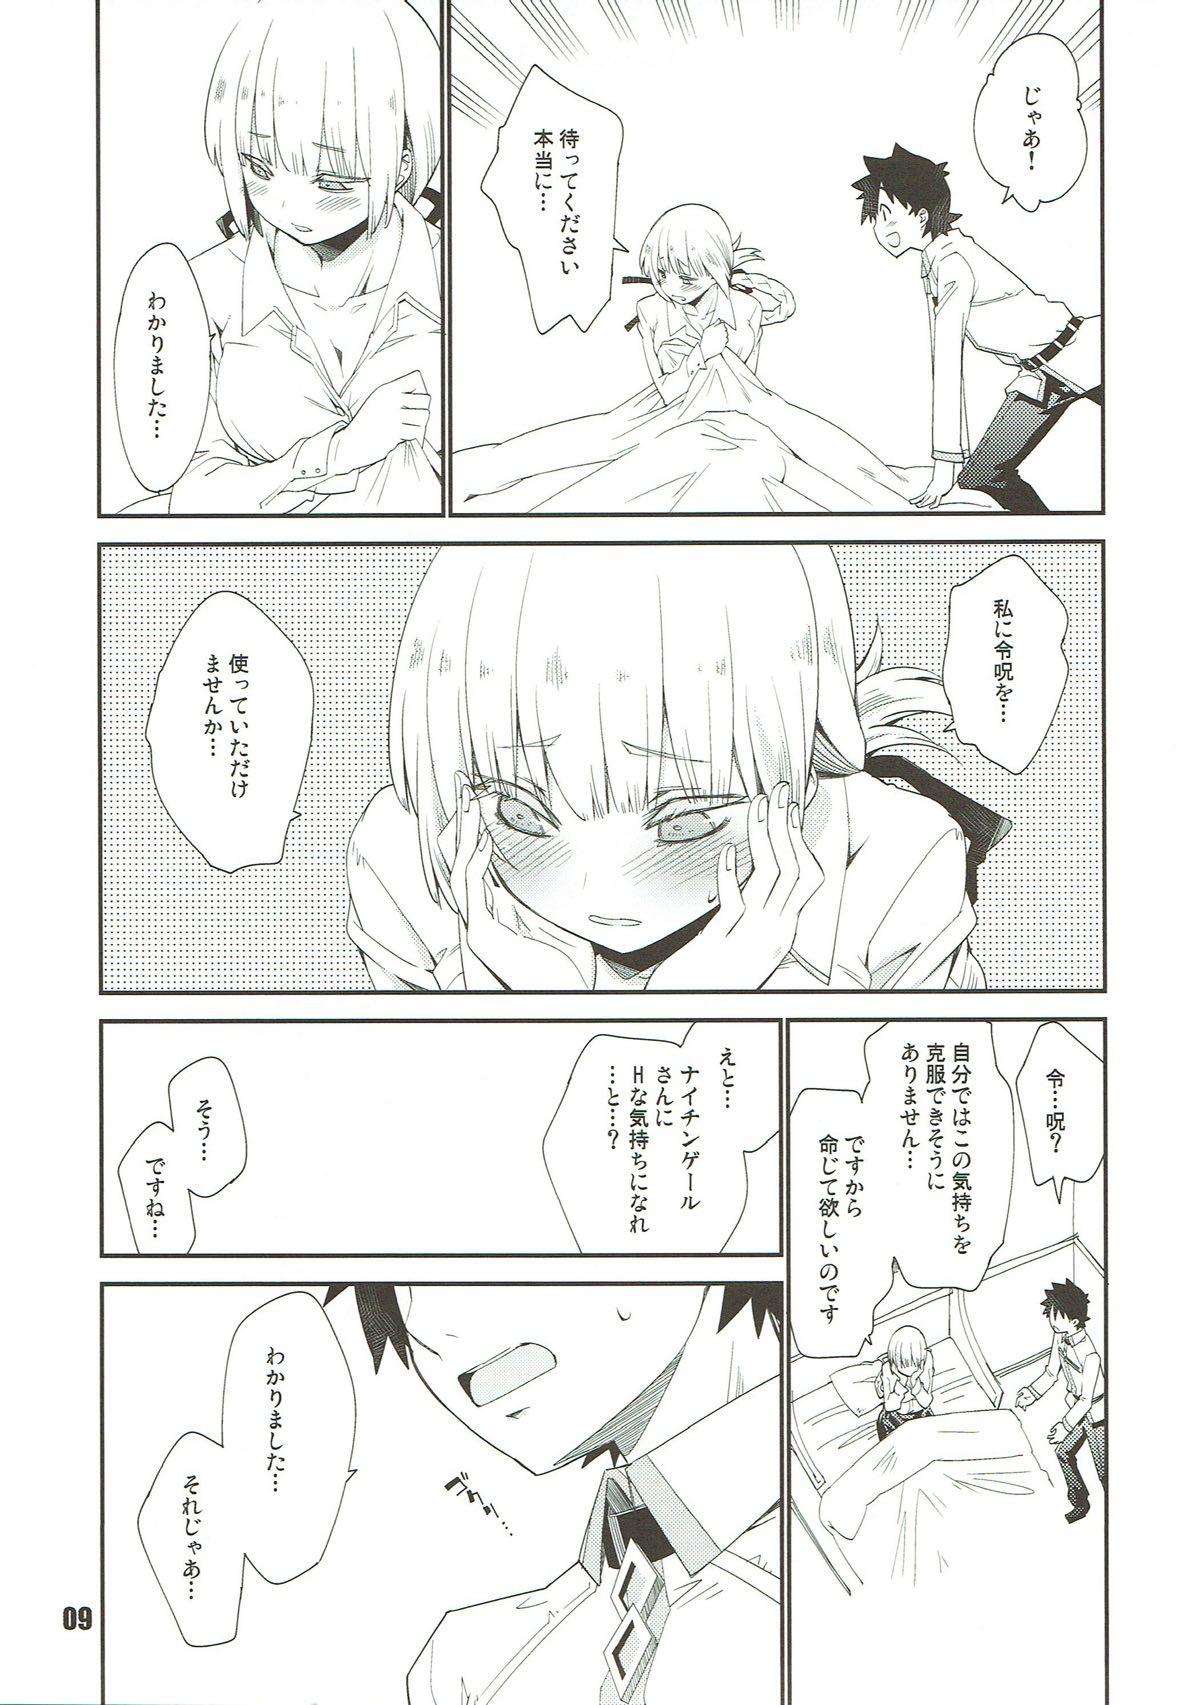 Sucks Nightingale Syndrome - Fate grand order Bear - Page 8